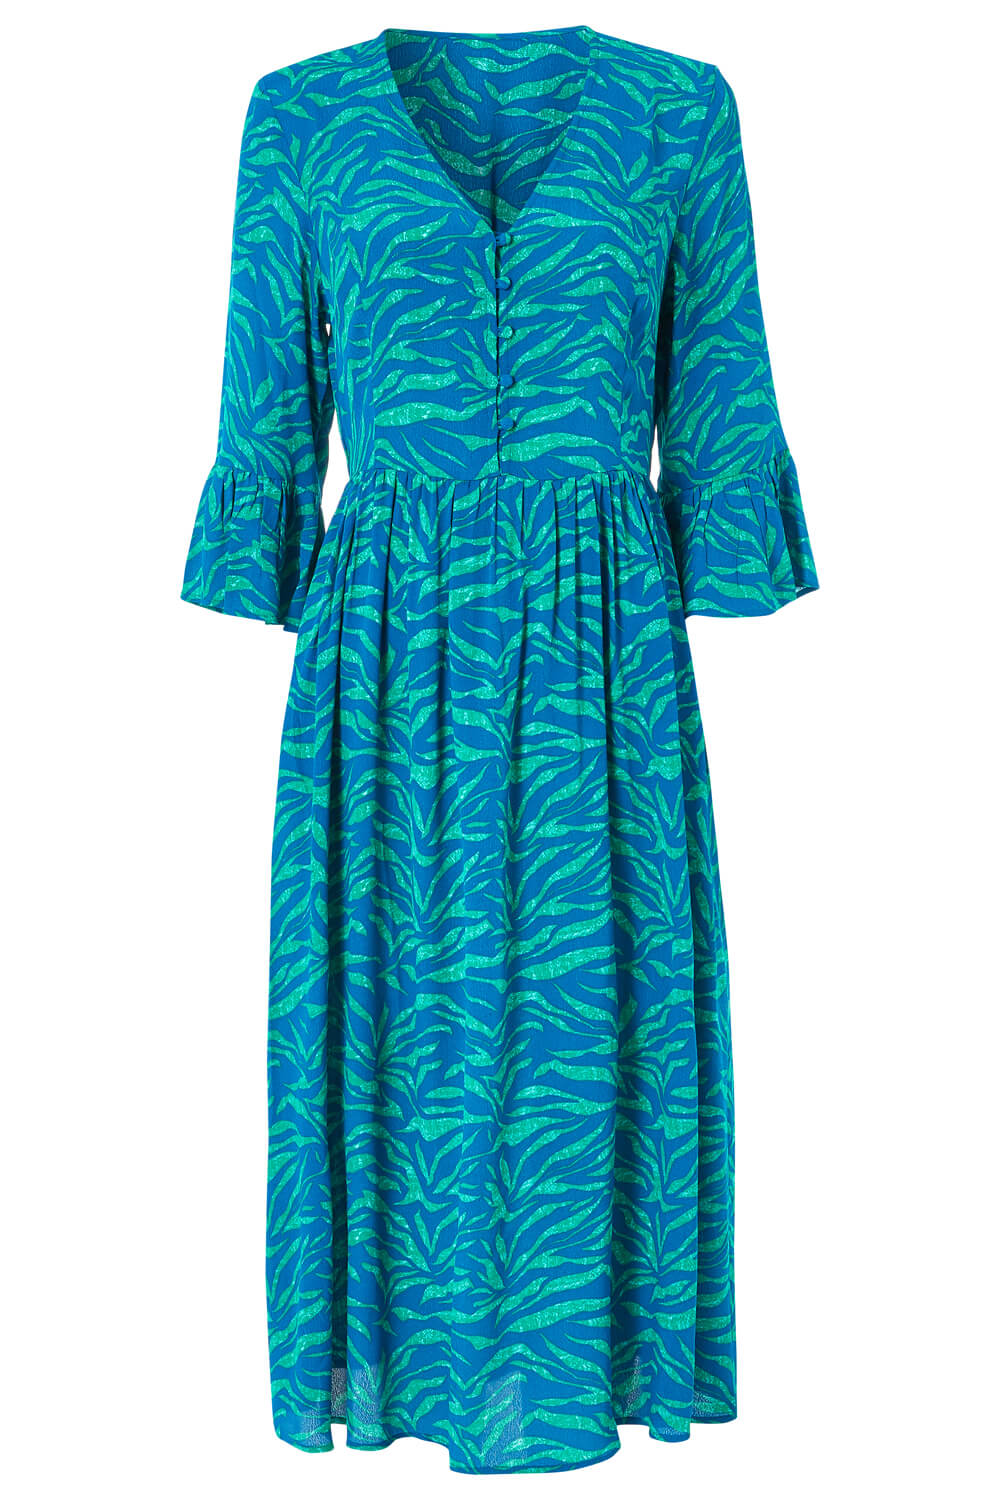 Turquoise Abstract Animal Print Button Detail Midi Dress, Image 4 of 4